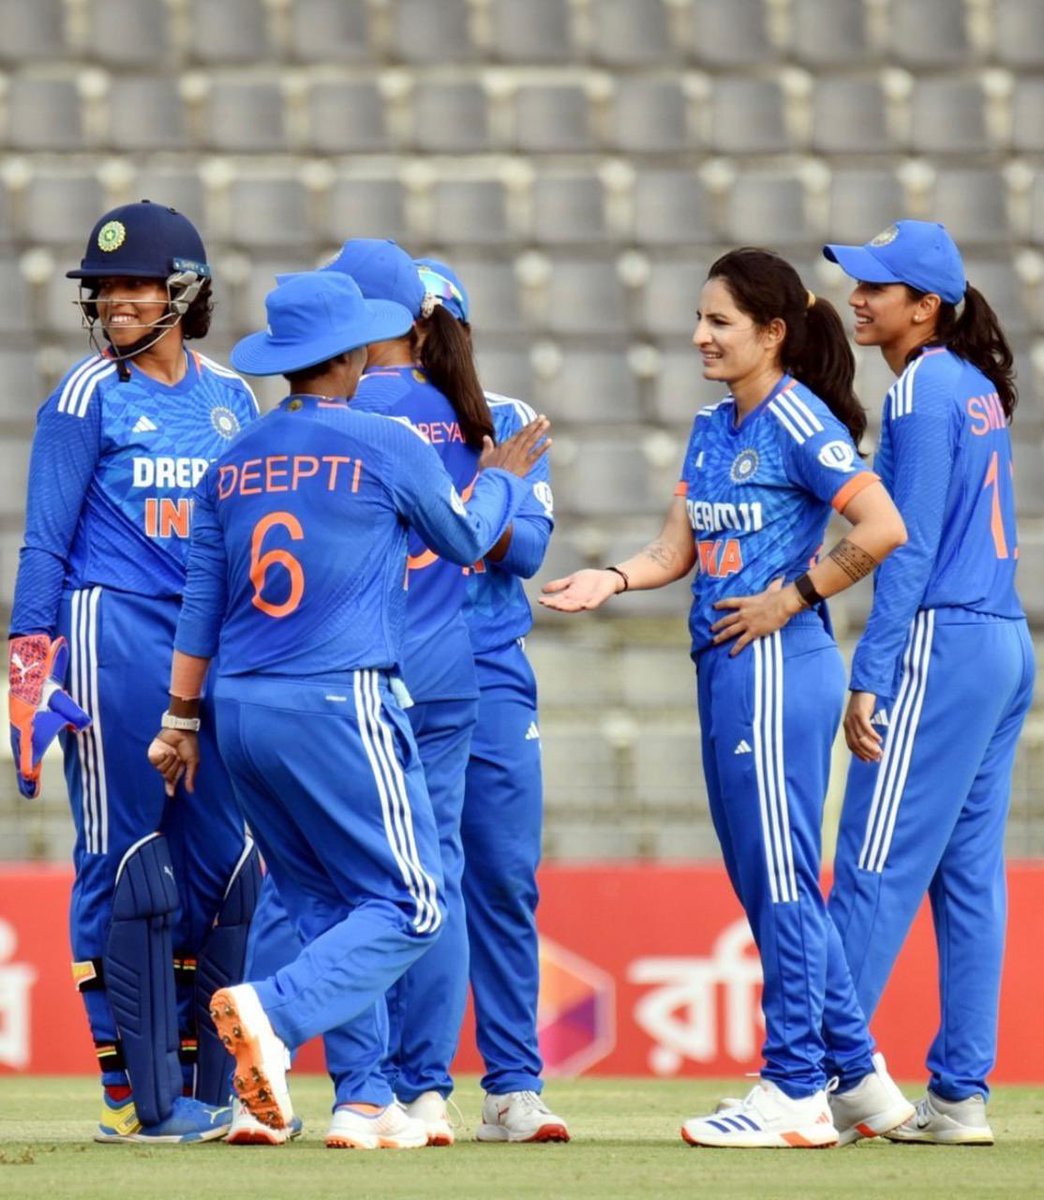 An exhilarating performance by the Women in Blue in the 3rd T20I secures the series victory with two games to spare! @mandhana_smriti and @TheShafaliVerma’s partnership in the run chase was simply sensational. Kudos to the entire team and support staff on this commanding series…